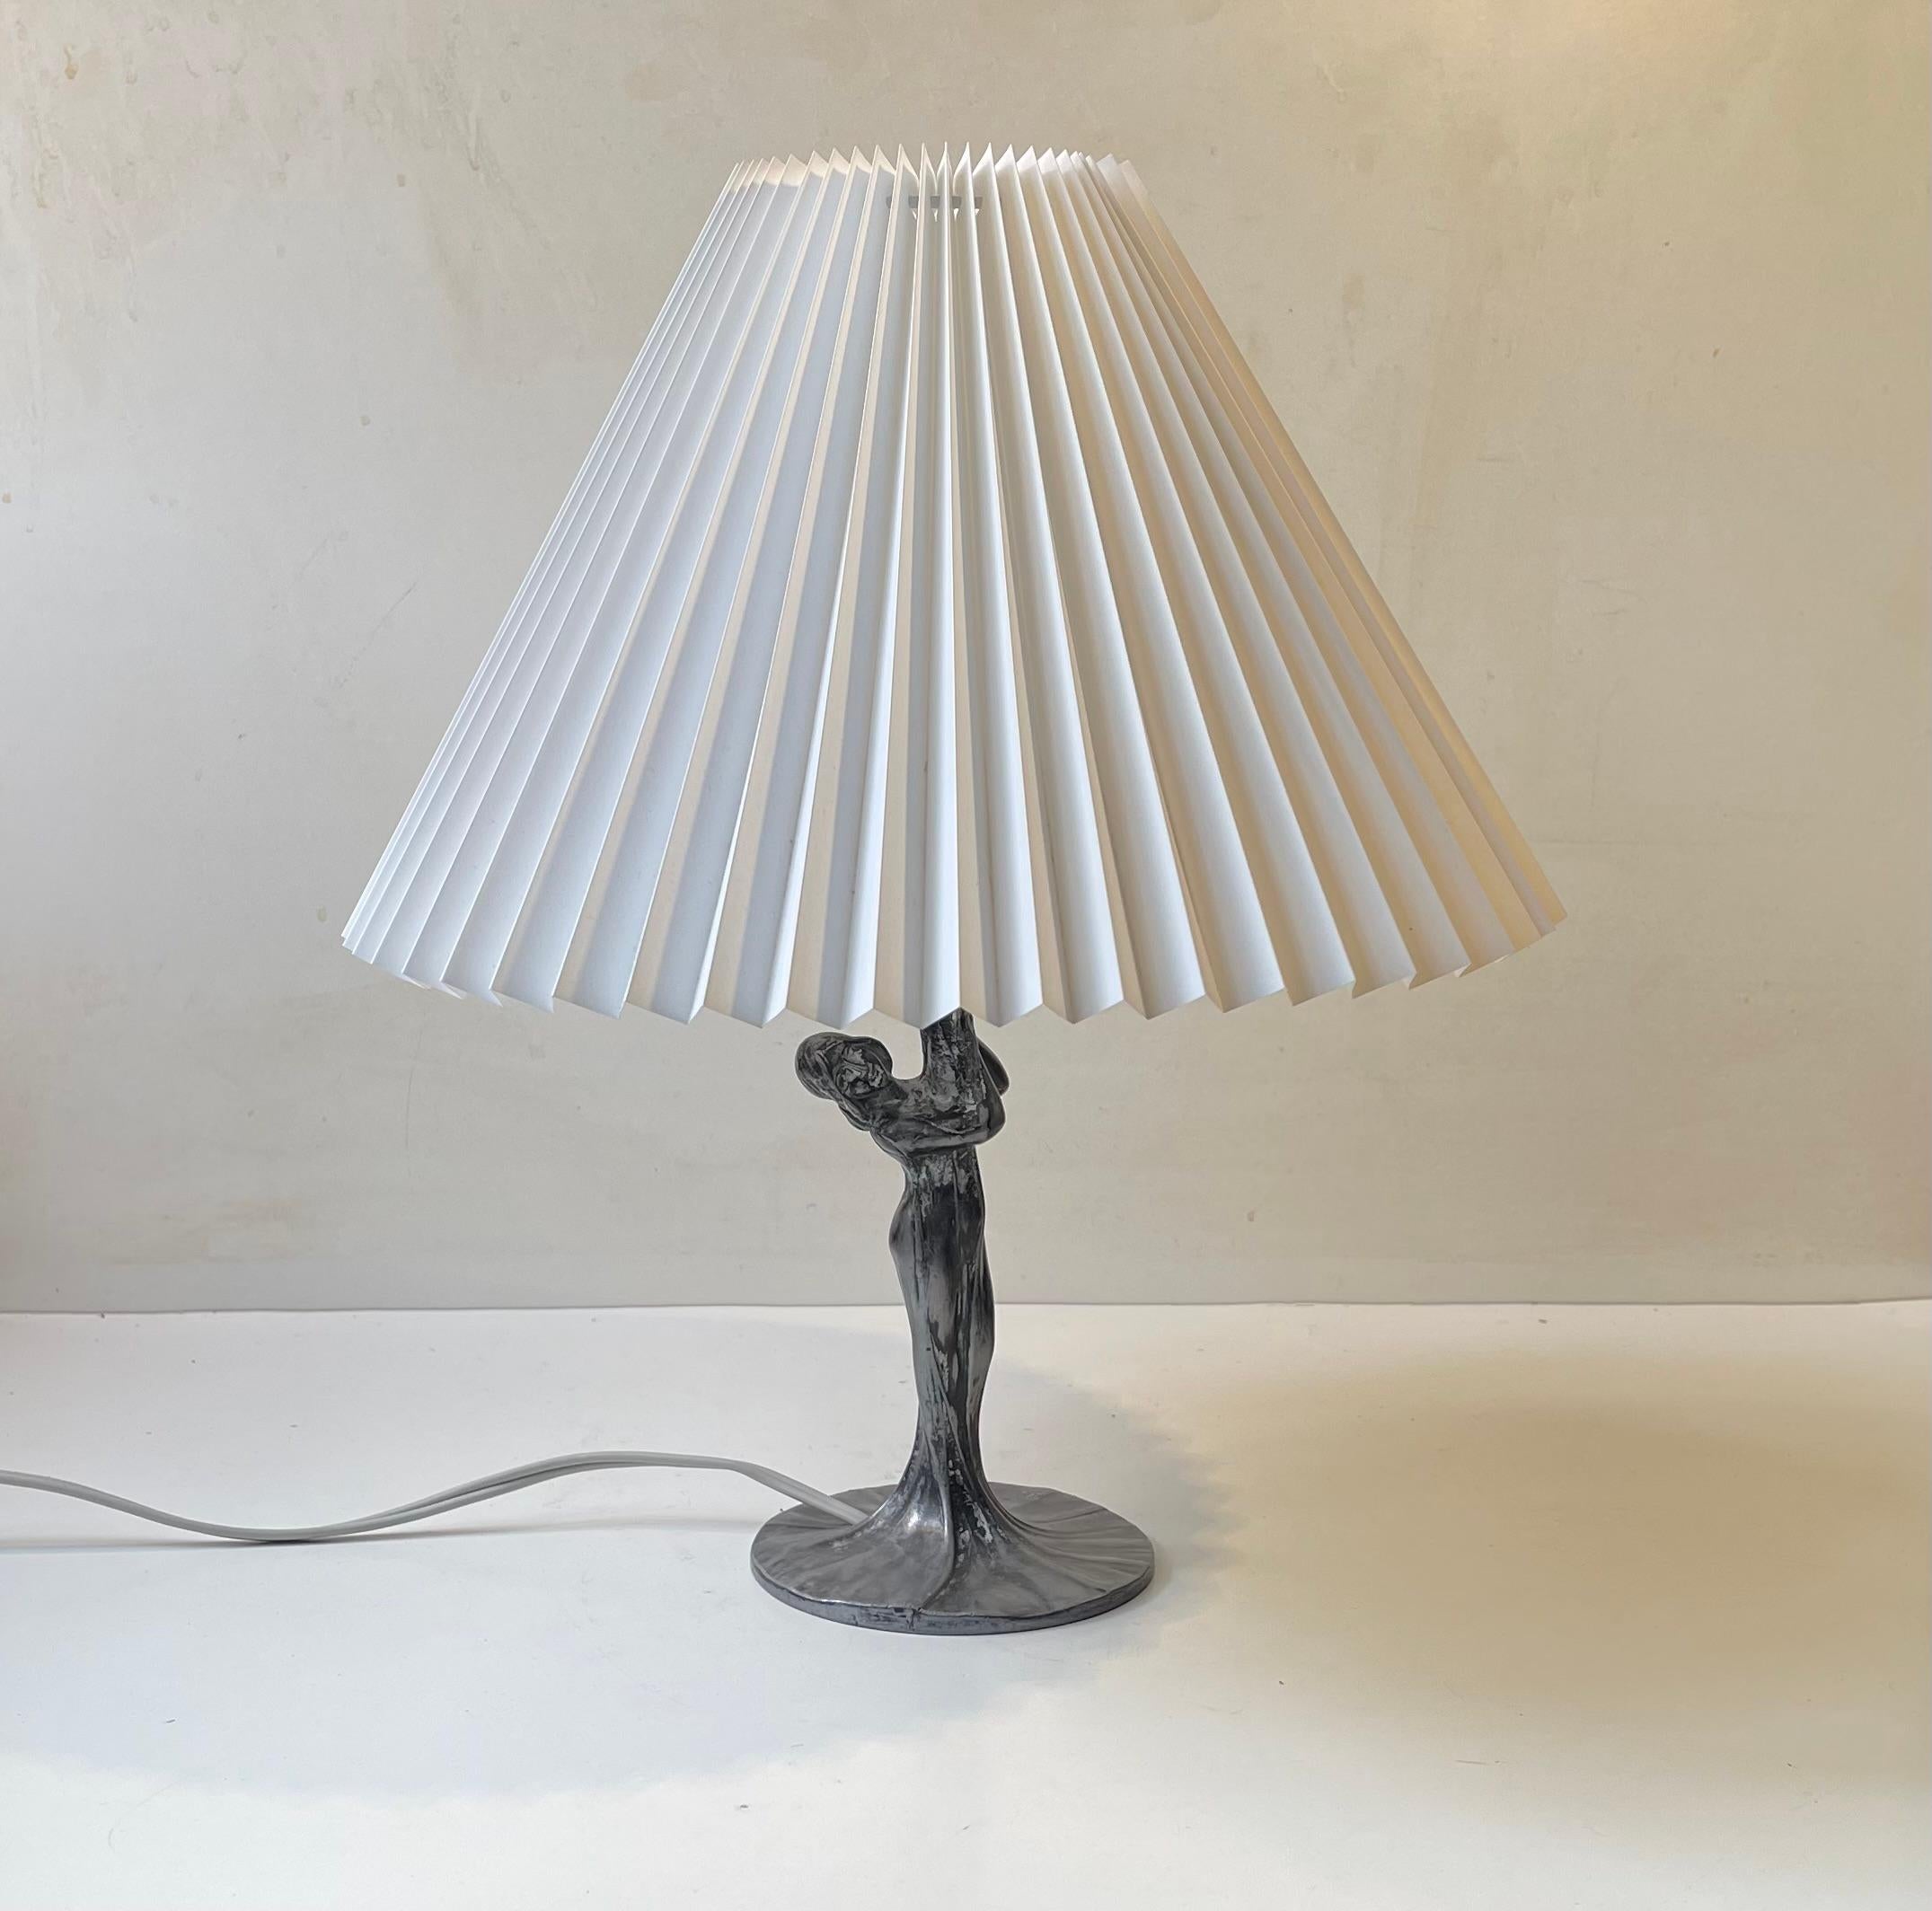 French Art Deco 'Dress' Table Lamp in Pewter, 1930s For Sale 2